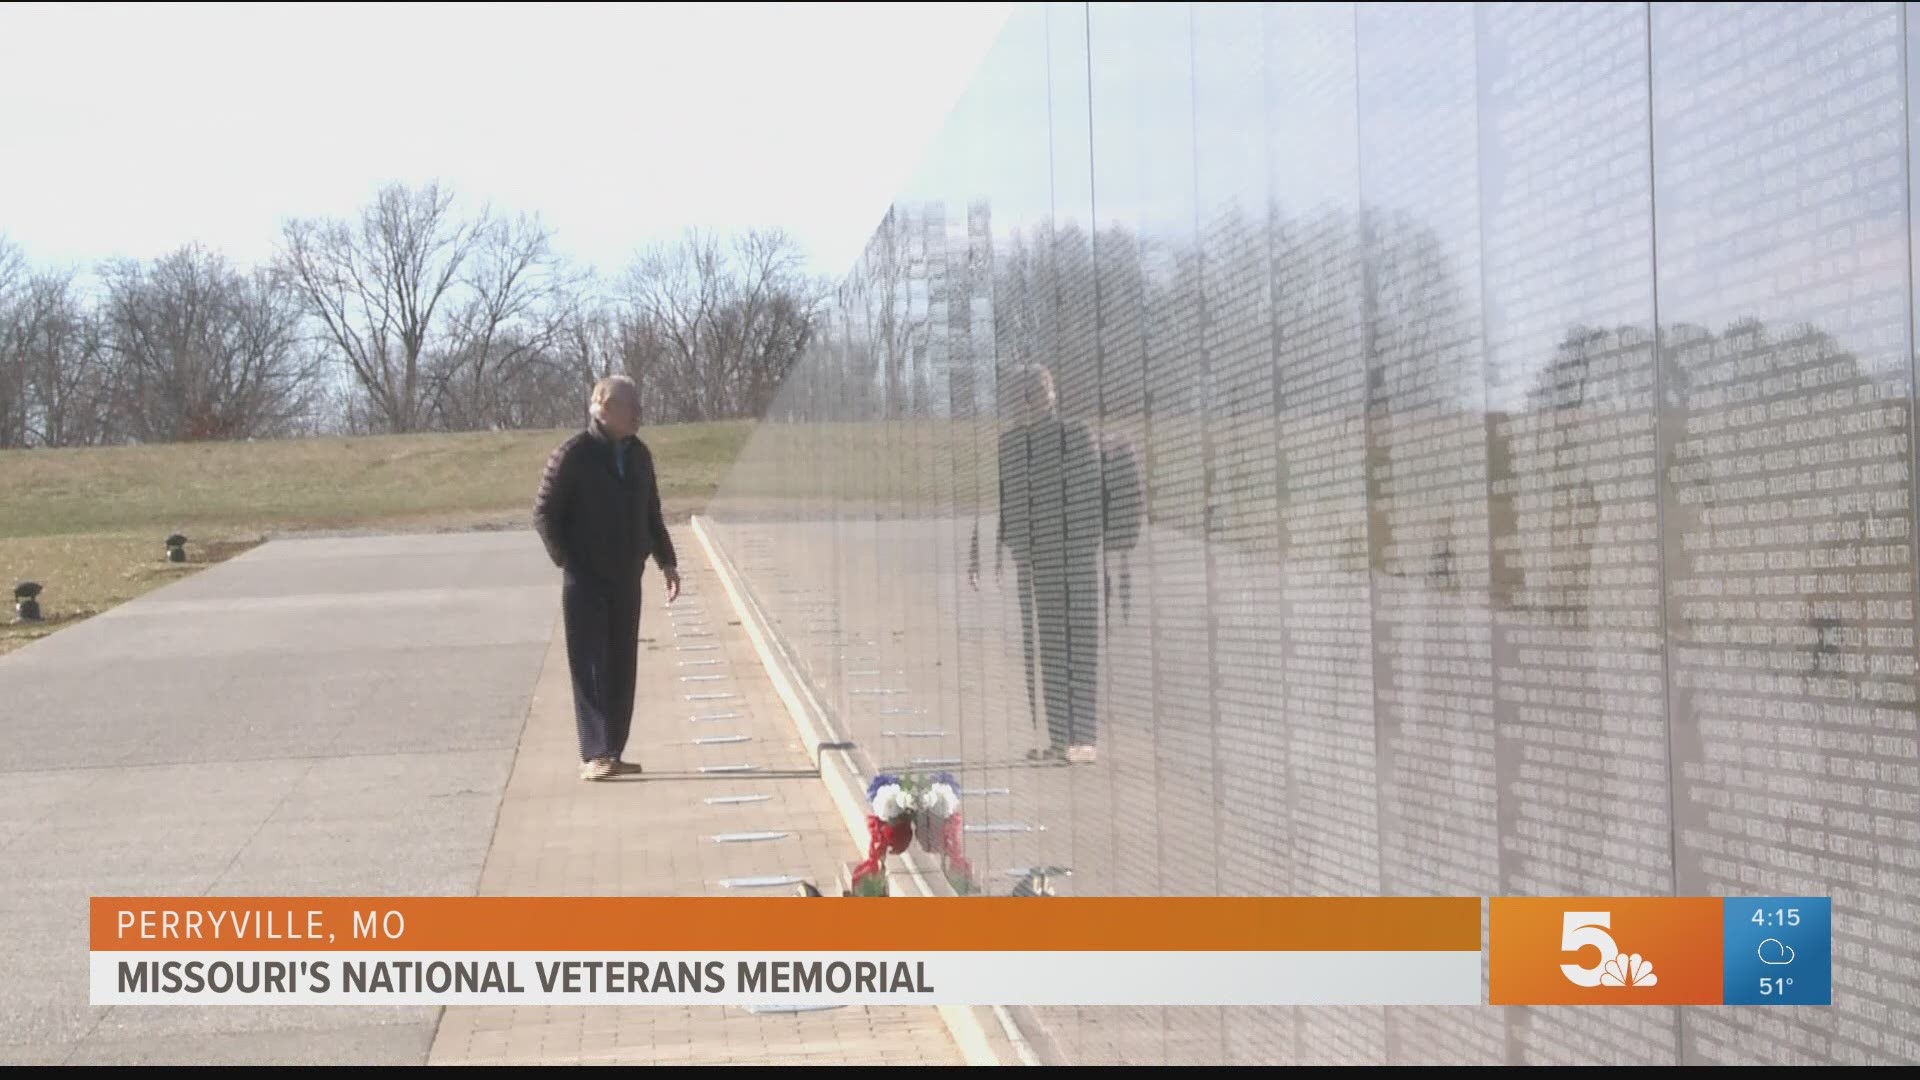 If you've always wanted to see the Vietnam Veterans Memorial, but can't make it to Washington DC, look no further than Perryville, Missouri. An exact replica of The Wall, a big moving tribute to those who gave their lives for our country, is just a short drive outside of St. Louis.